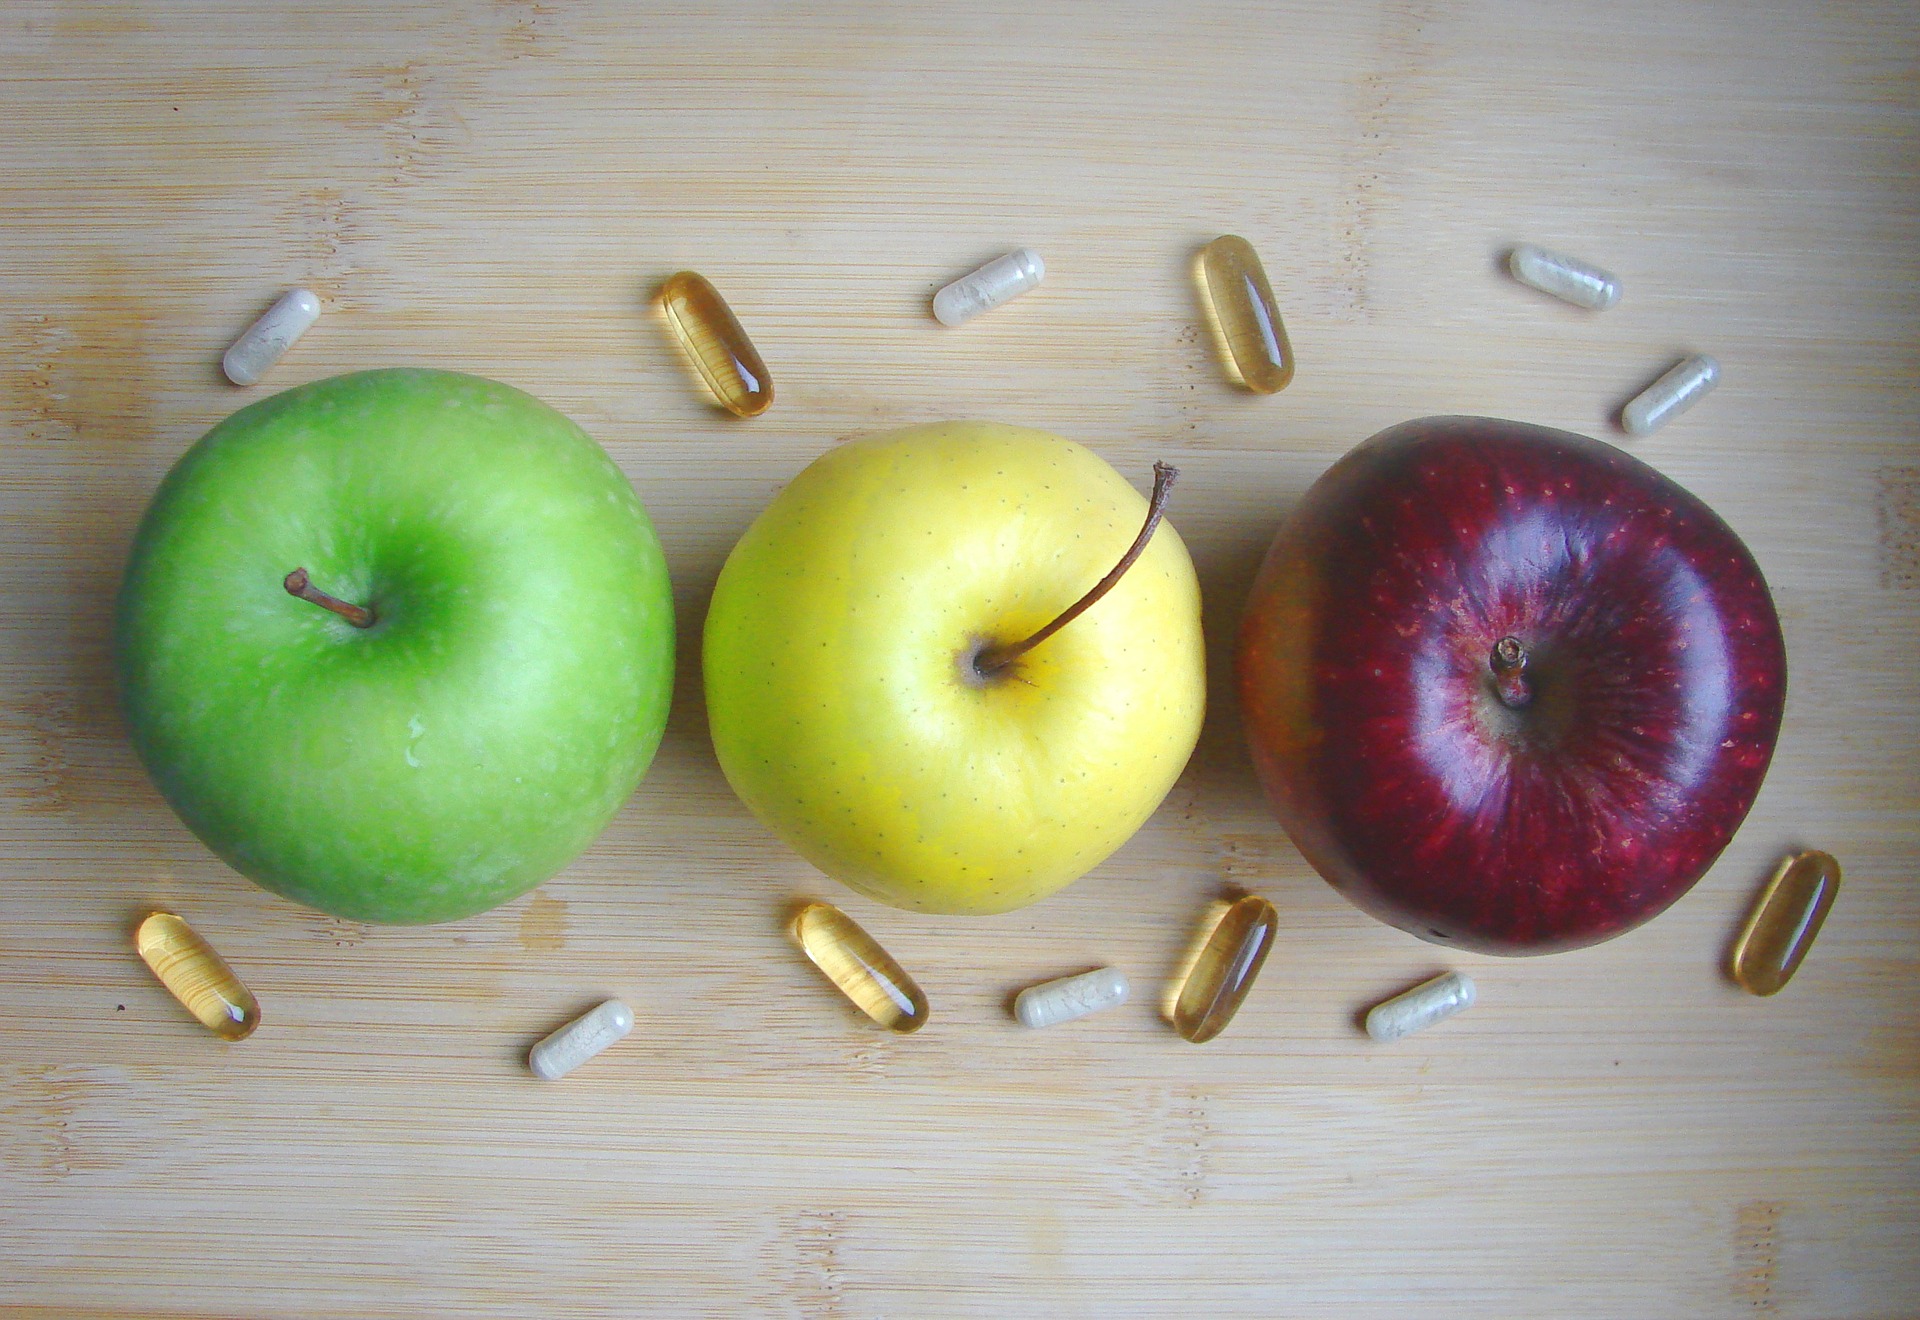 apple, fruits, and vitamins